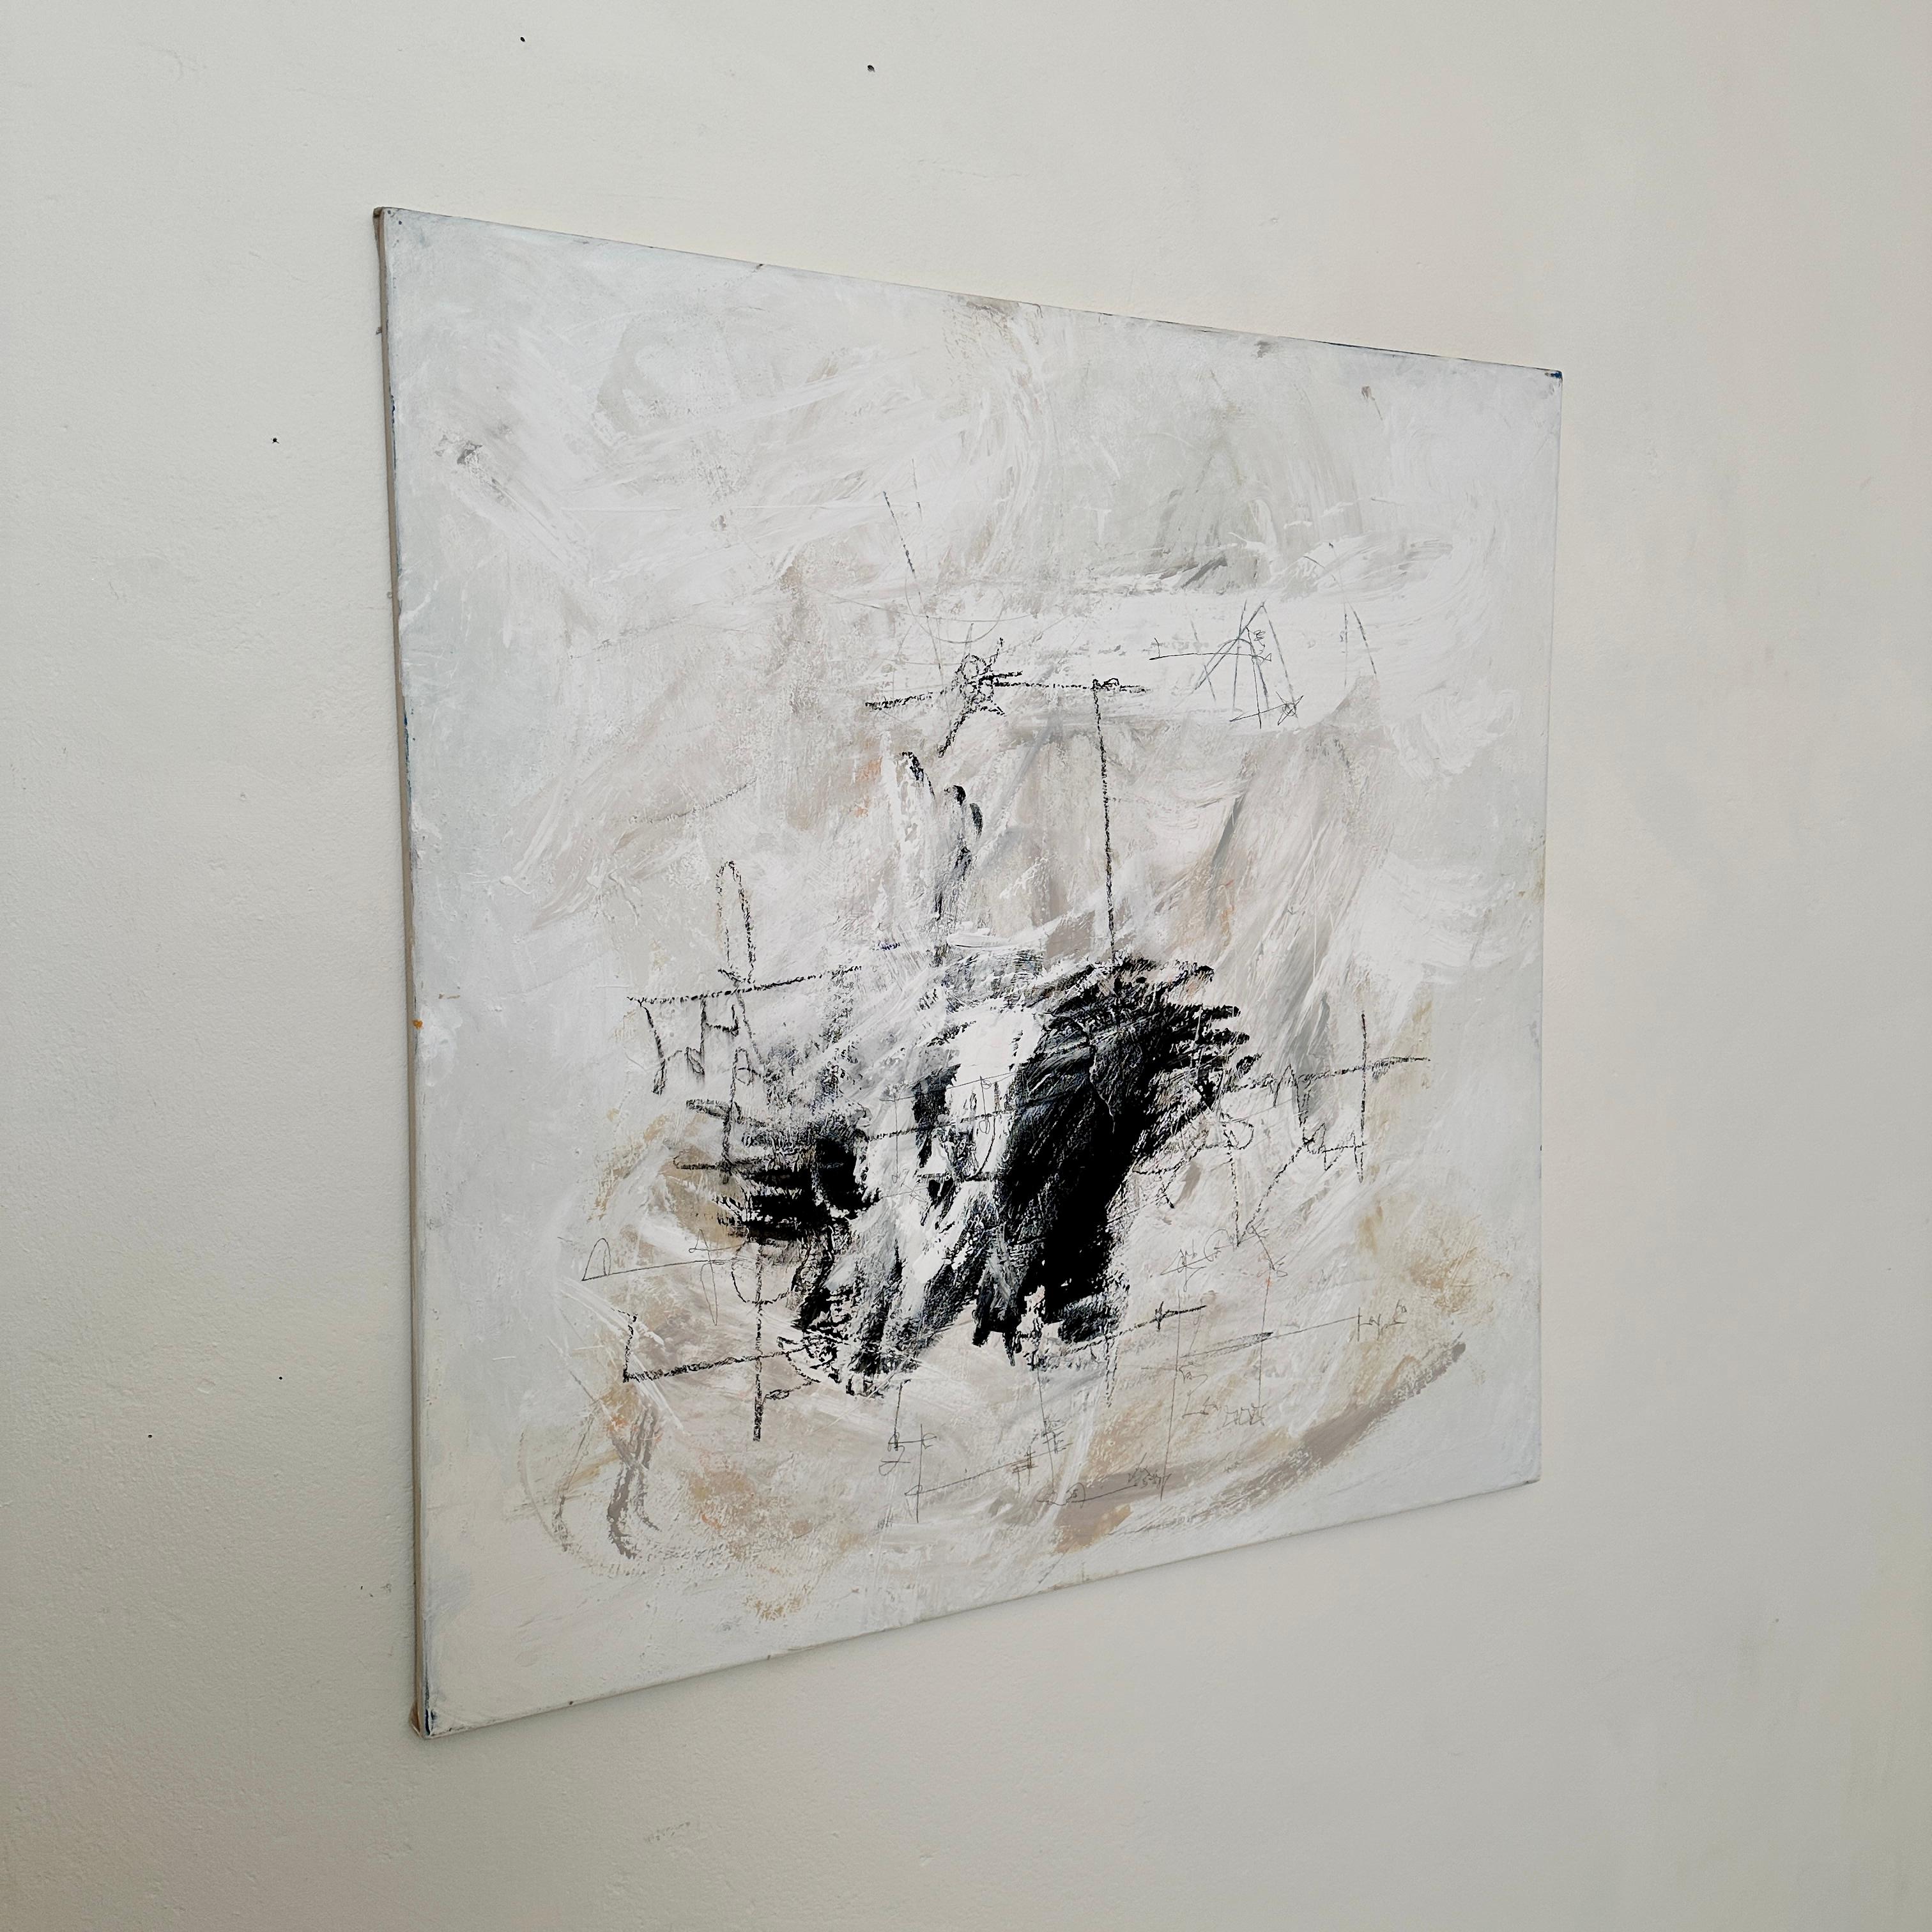 This beautiful Contemporary Abstract Painting on Canvas in Black and White  by Felix Bachmann was made 2023.
The pieces is painted on canvas with acrylic, pencil and chalk.
A unique piece which is a great eye-catcher for your antique, modern, space